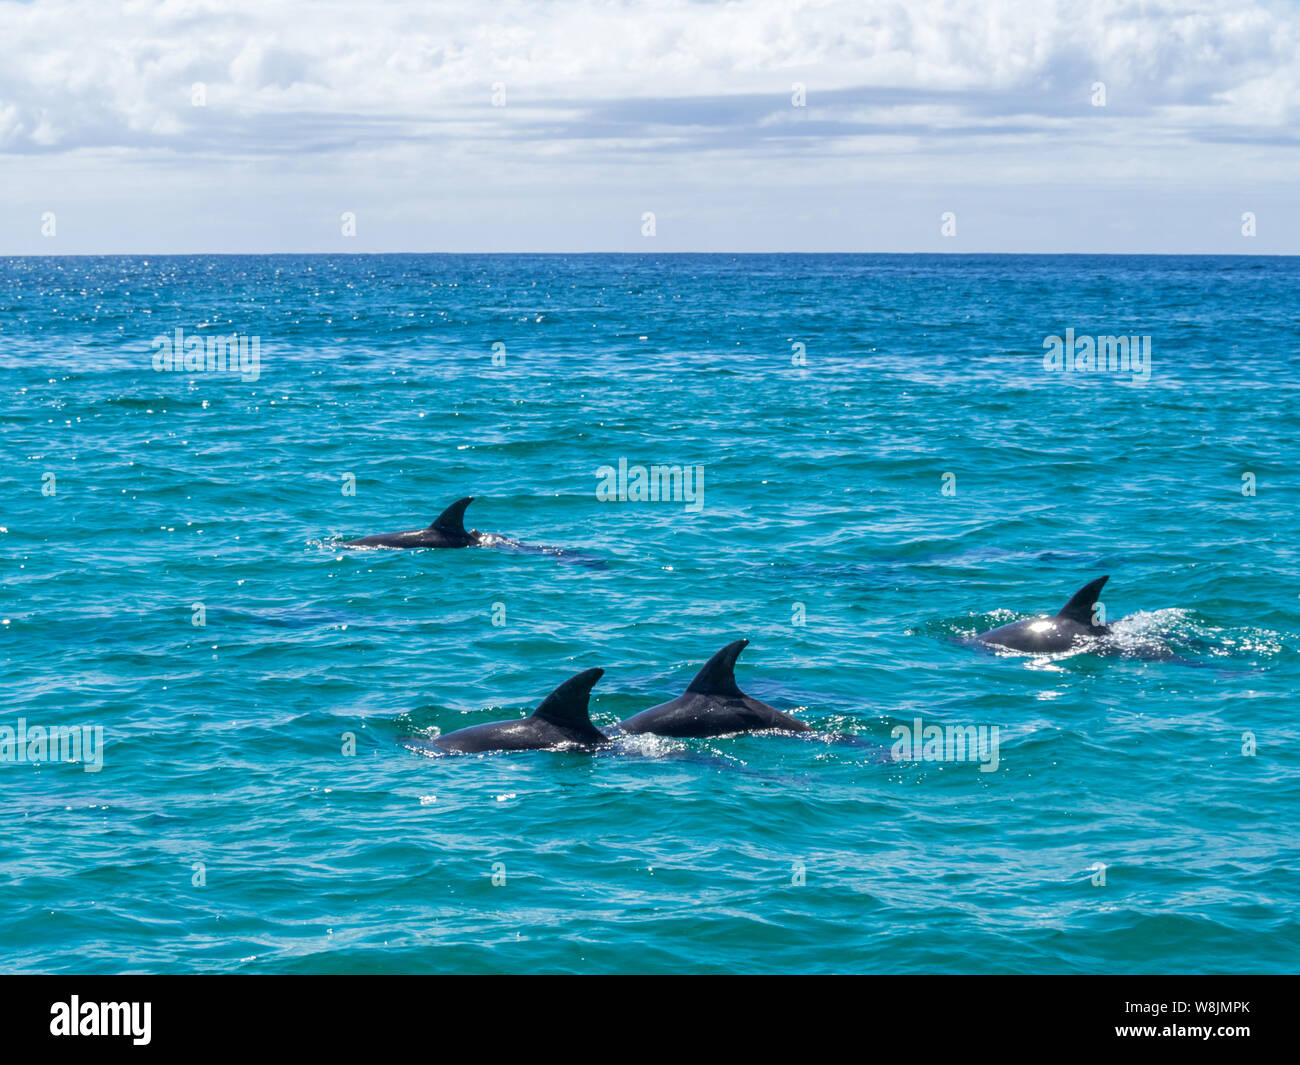 Dolphins in the turquoise waters of the Bay of Fires, Tasmania Stock Photo